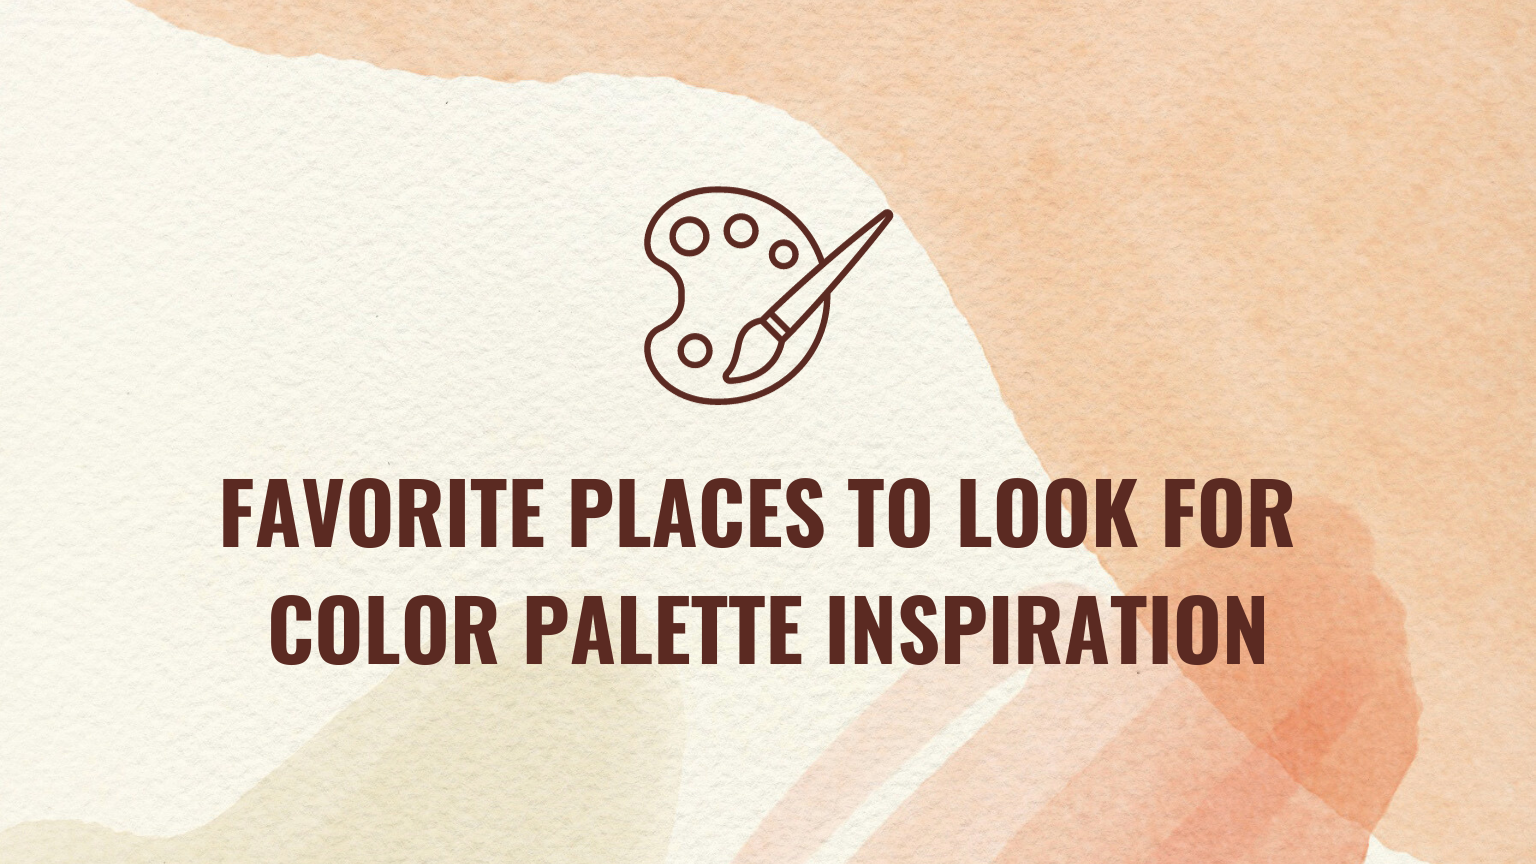 Favorite places to look for color palette inspiration